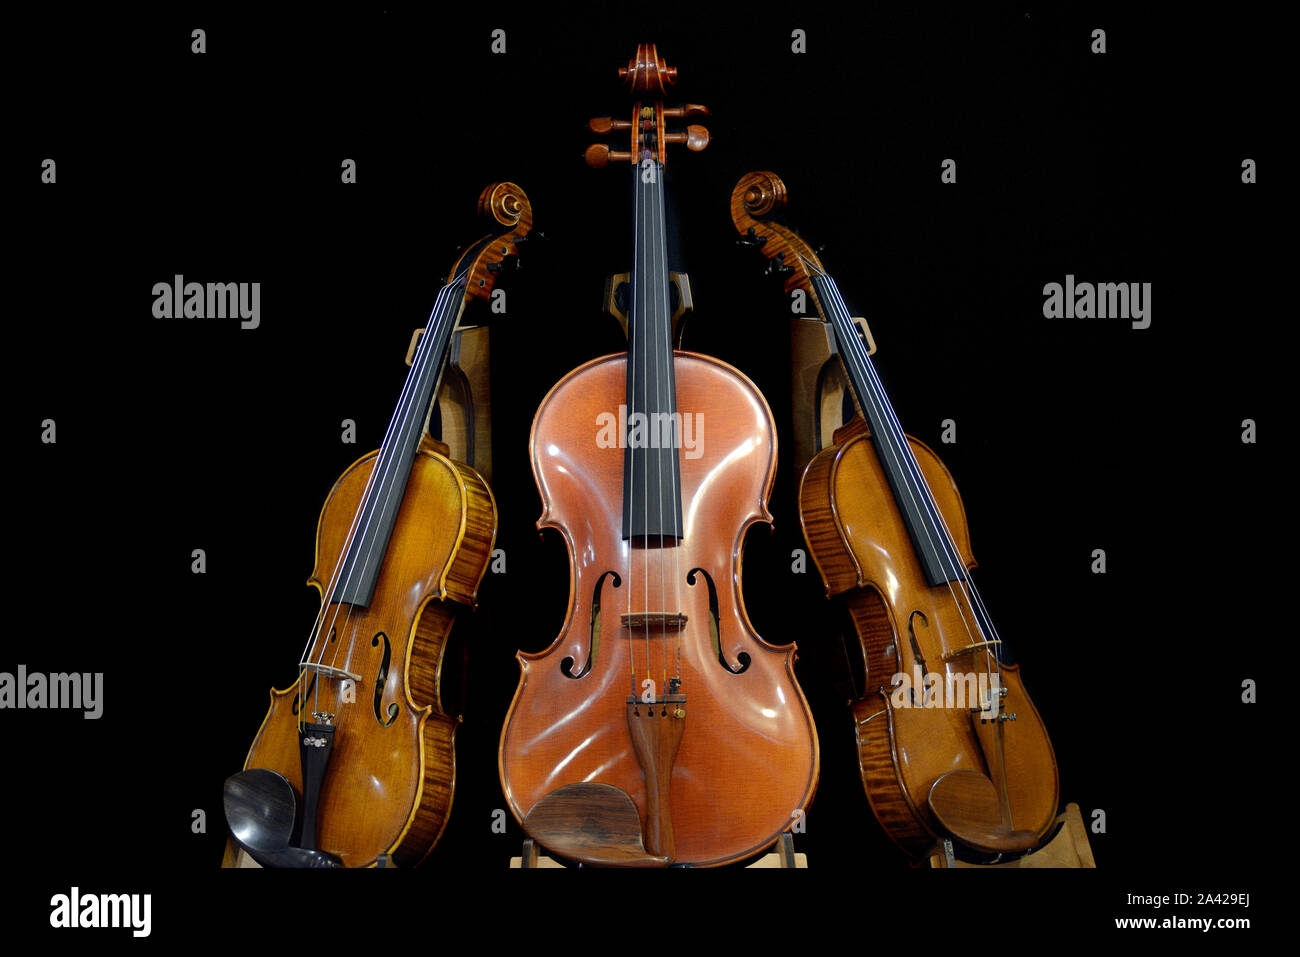 Italy, Lombardy, Cremona, Cremona Musica International Exhibitions and Festival 2019, Violins Standing Stock Photo